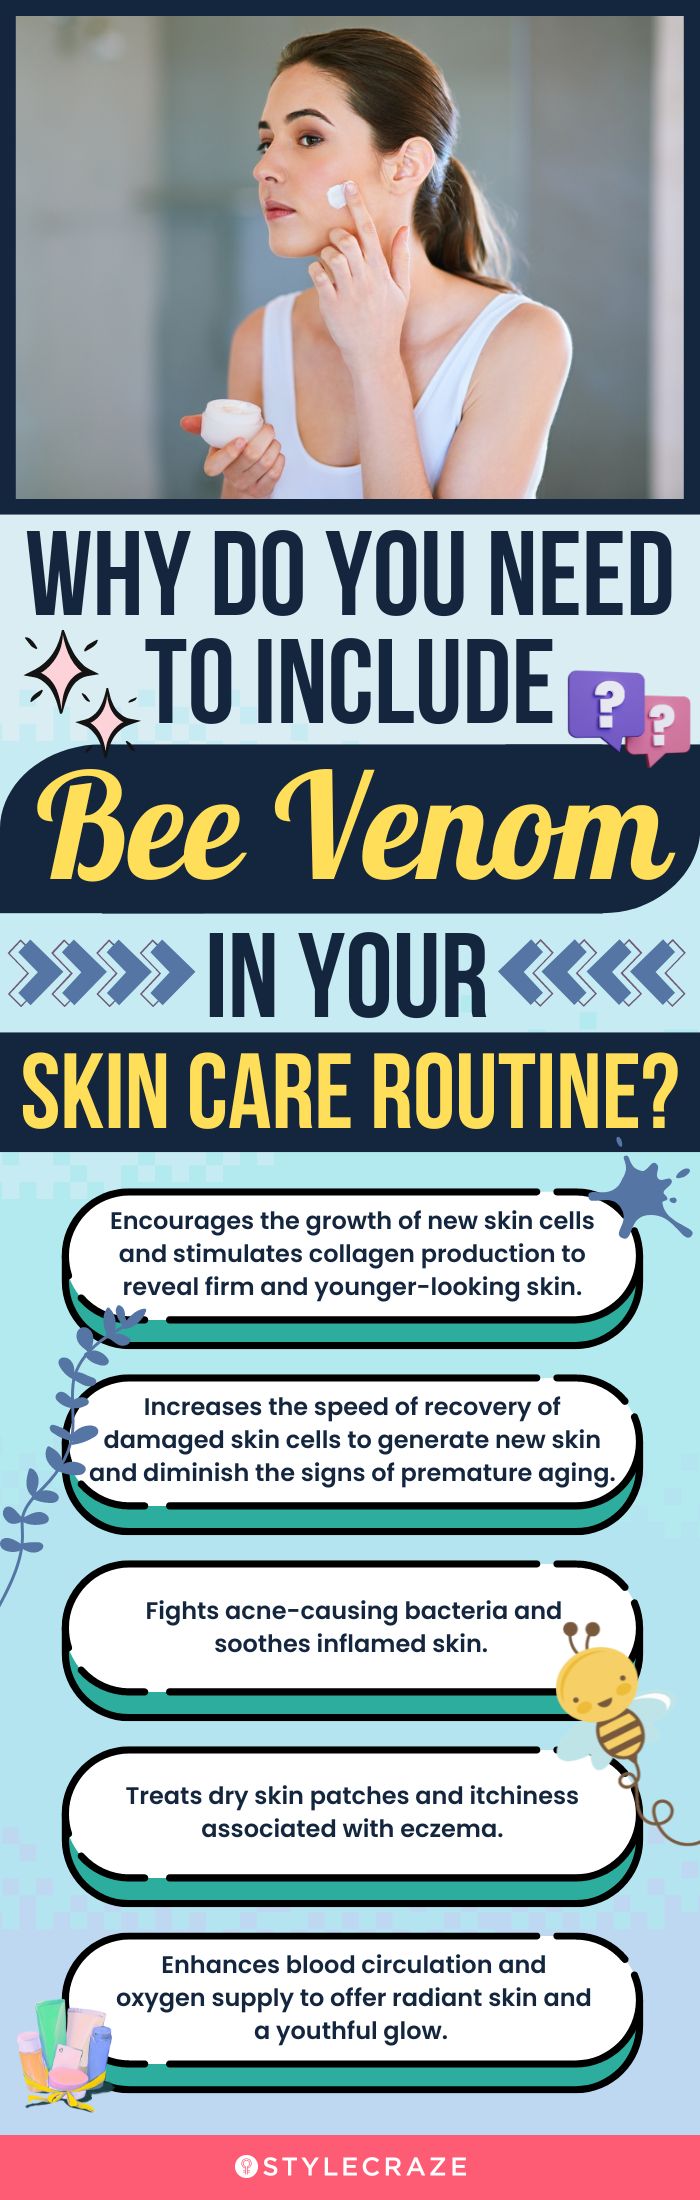 Why Do You Need To Include Bee Venom In Your Skin Care Routine? (infographic)